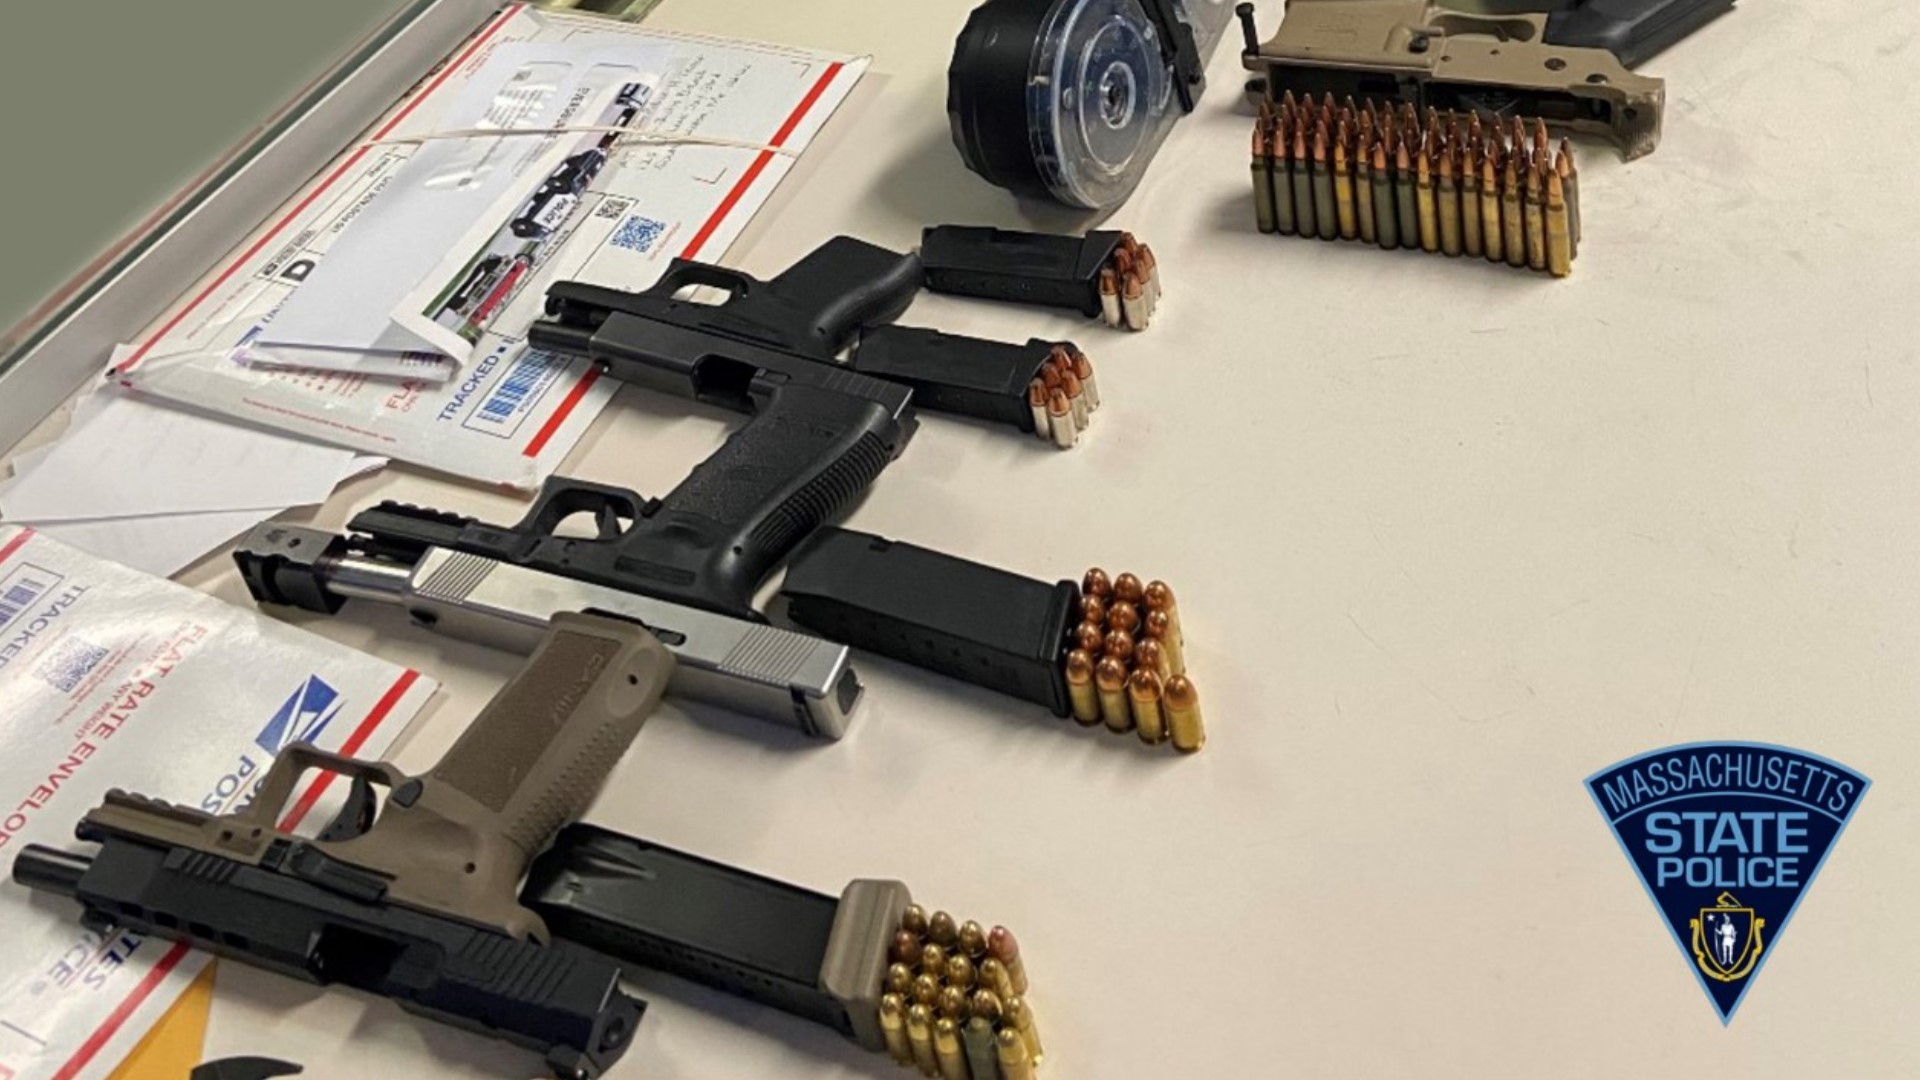 A 20-year-old Bentonville man was arrested in South Boston on Sunday morning for having guns in his car he said he legally purchased in Arkansas.